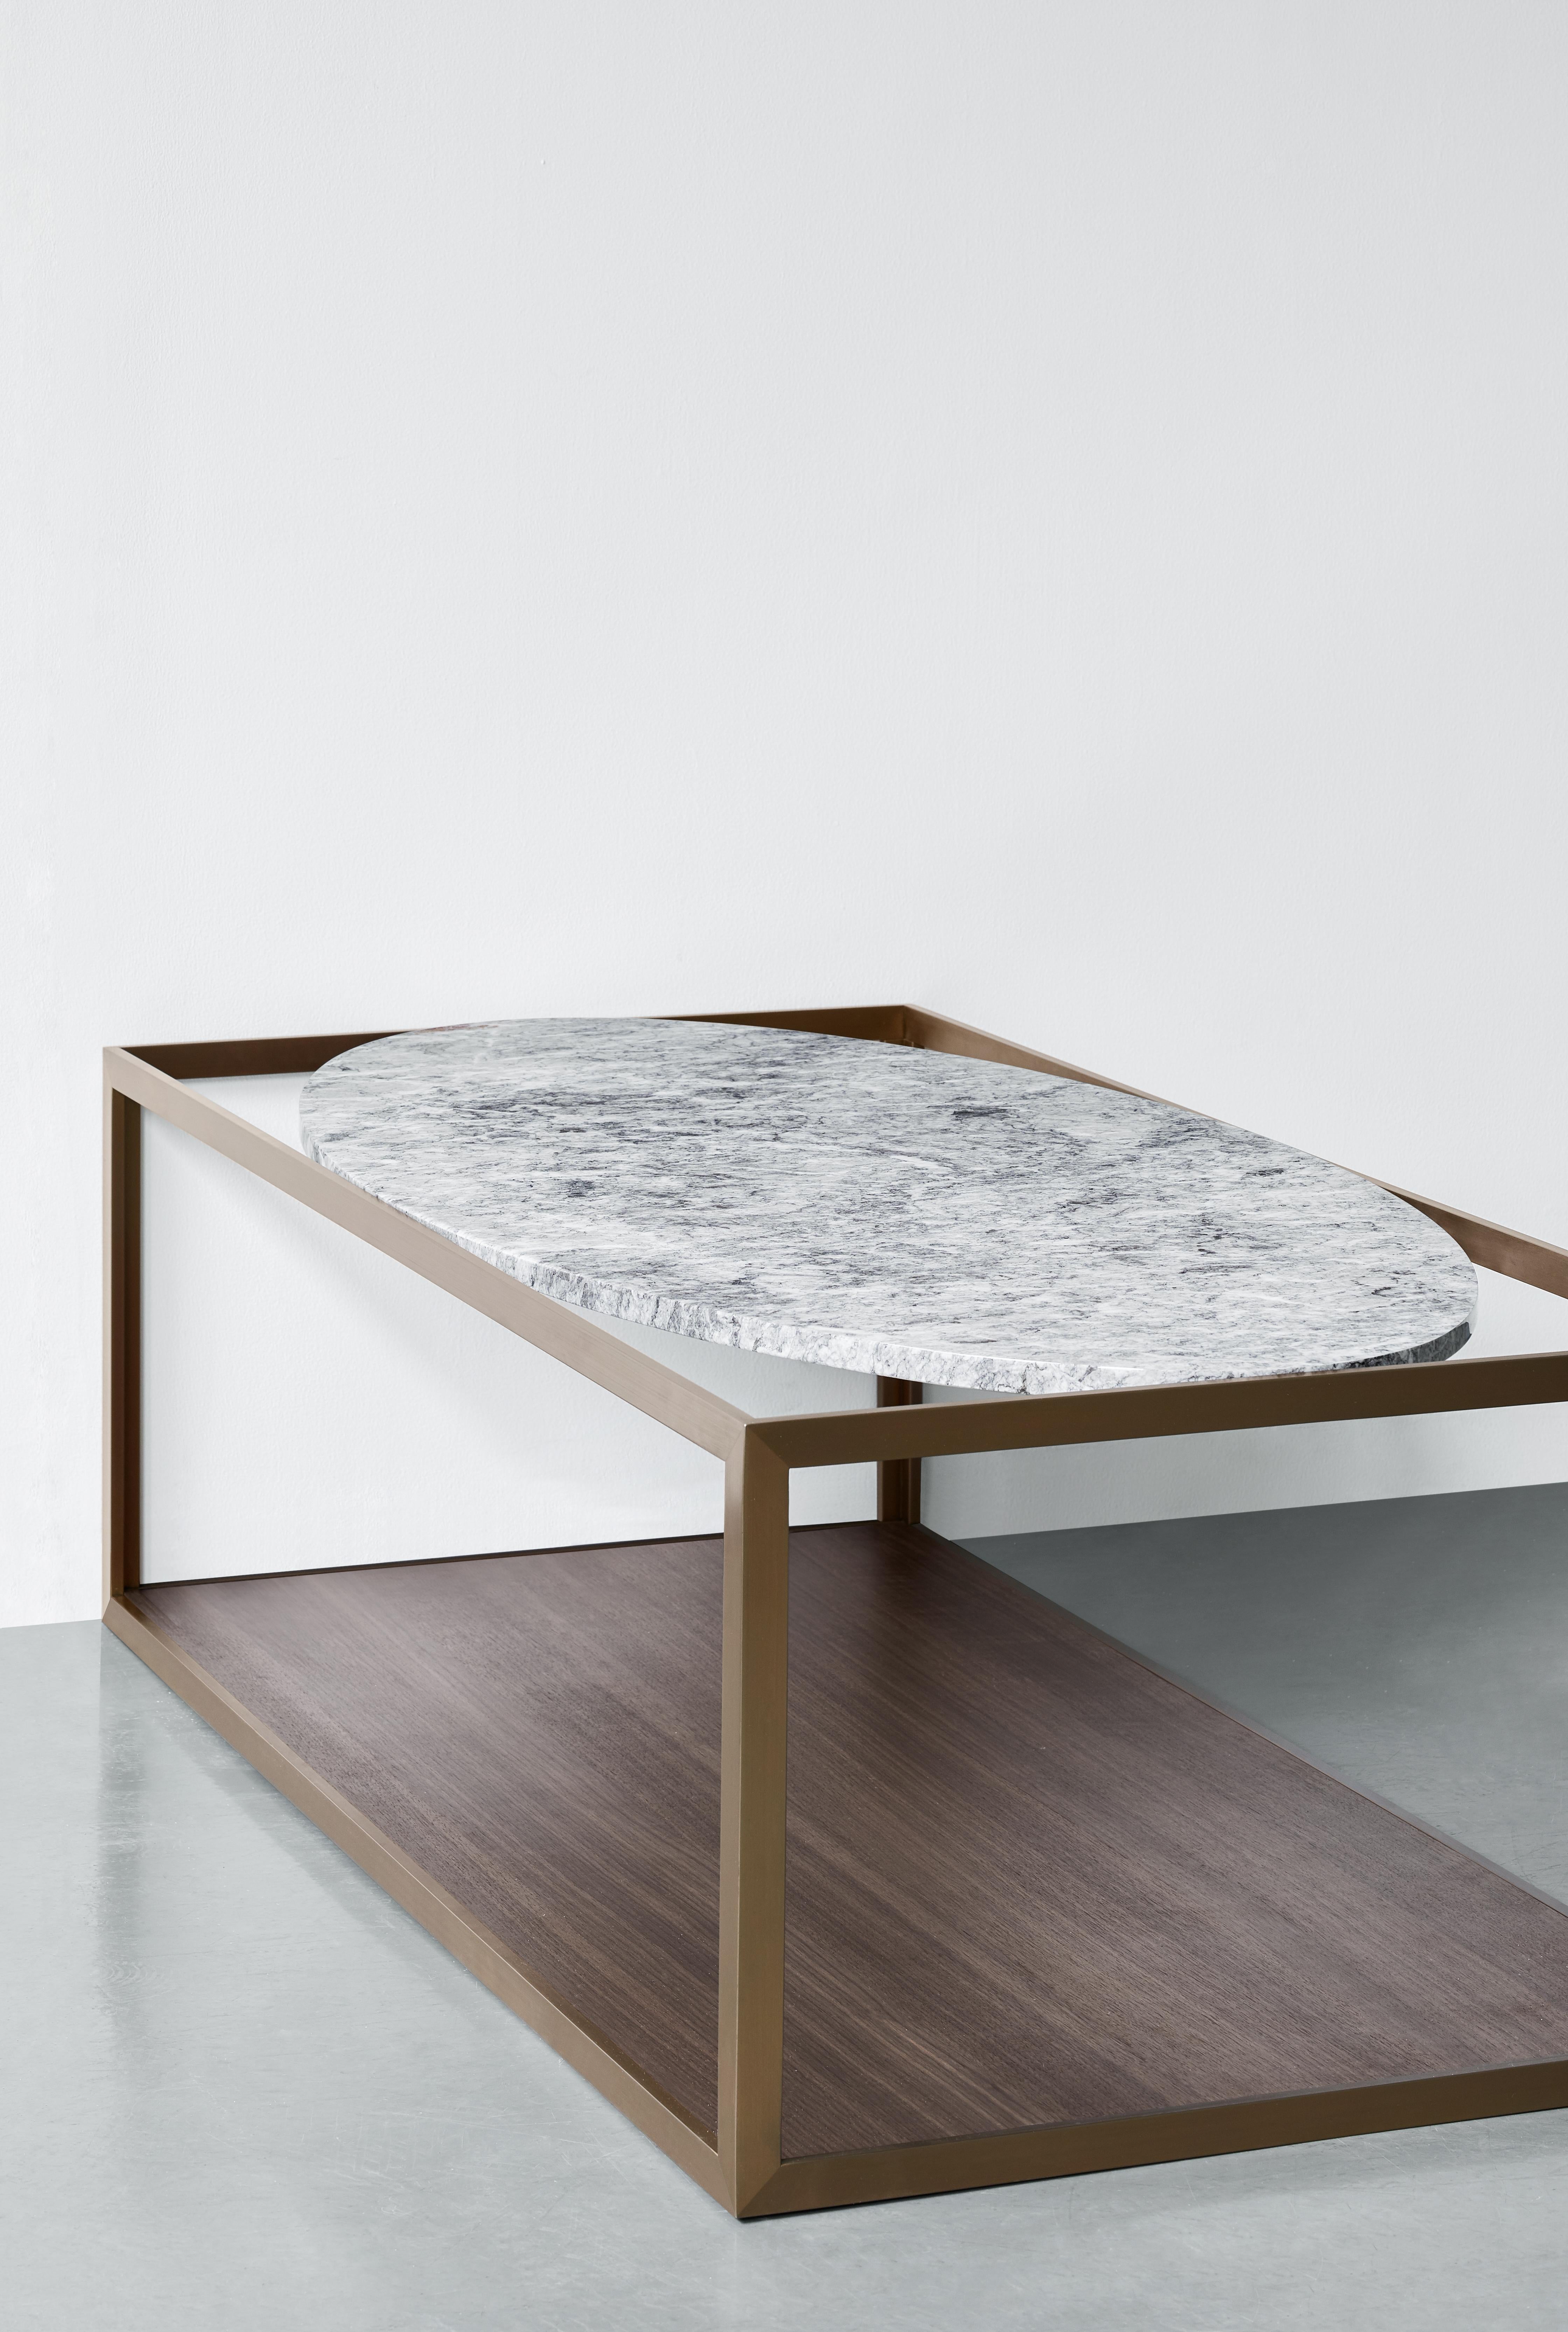 Hand-Crafted NORDST GAARD Coffee Table, Italian Grey Rain Marble, Danish Modern Design, New For Sale